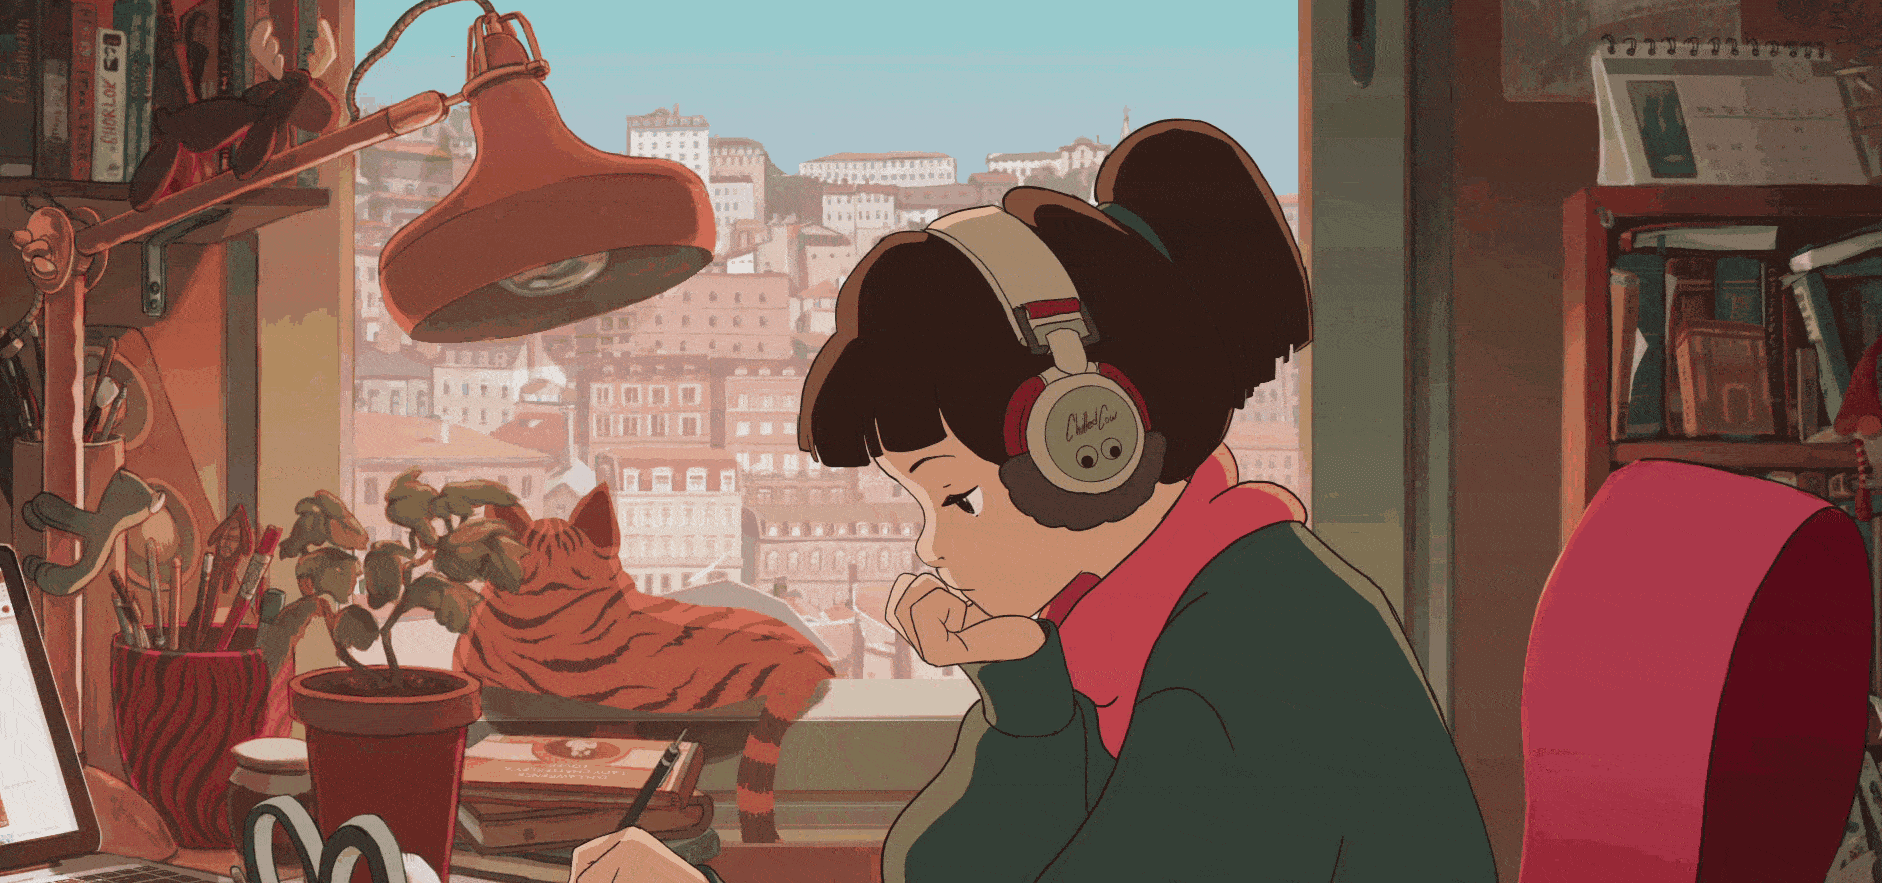 Best Lofi Hip Hop YouTube Channels to Relax and Study To